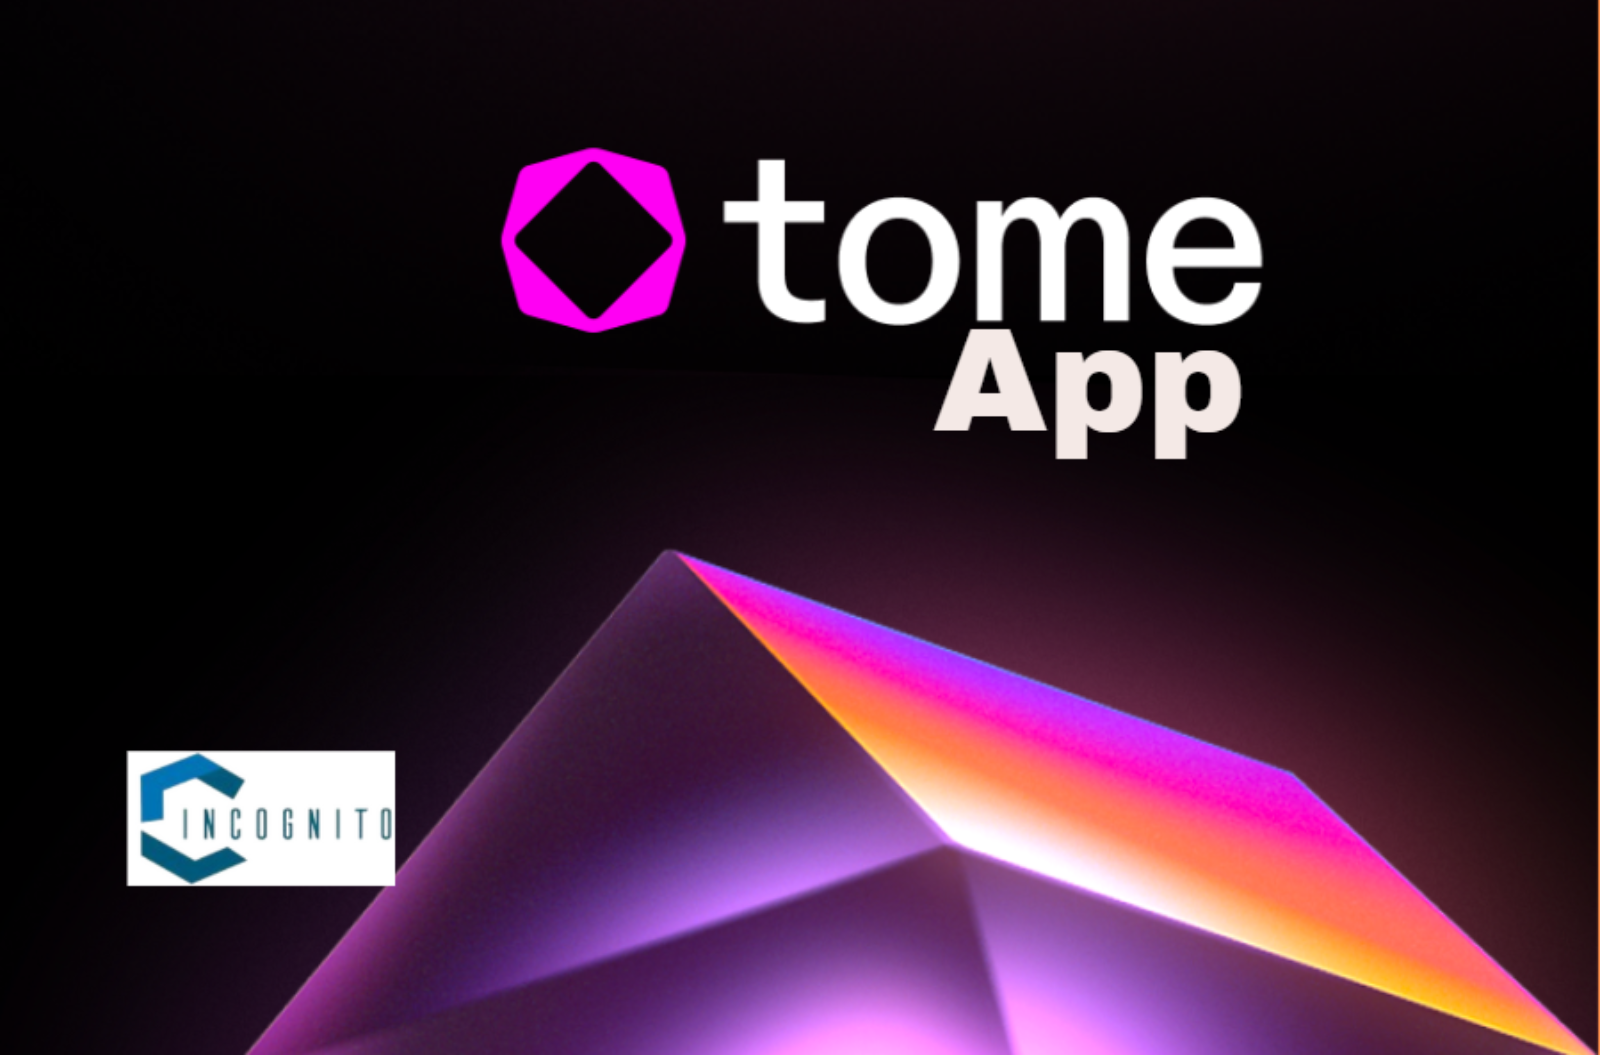 Tome App Presentations: How To Change Fonts, Colors, And Add Images, Charts, And Videos?